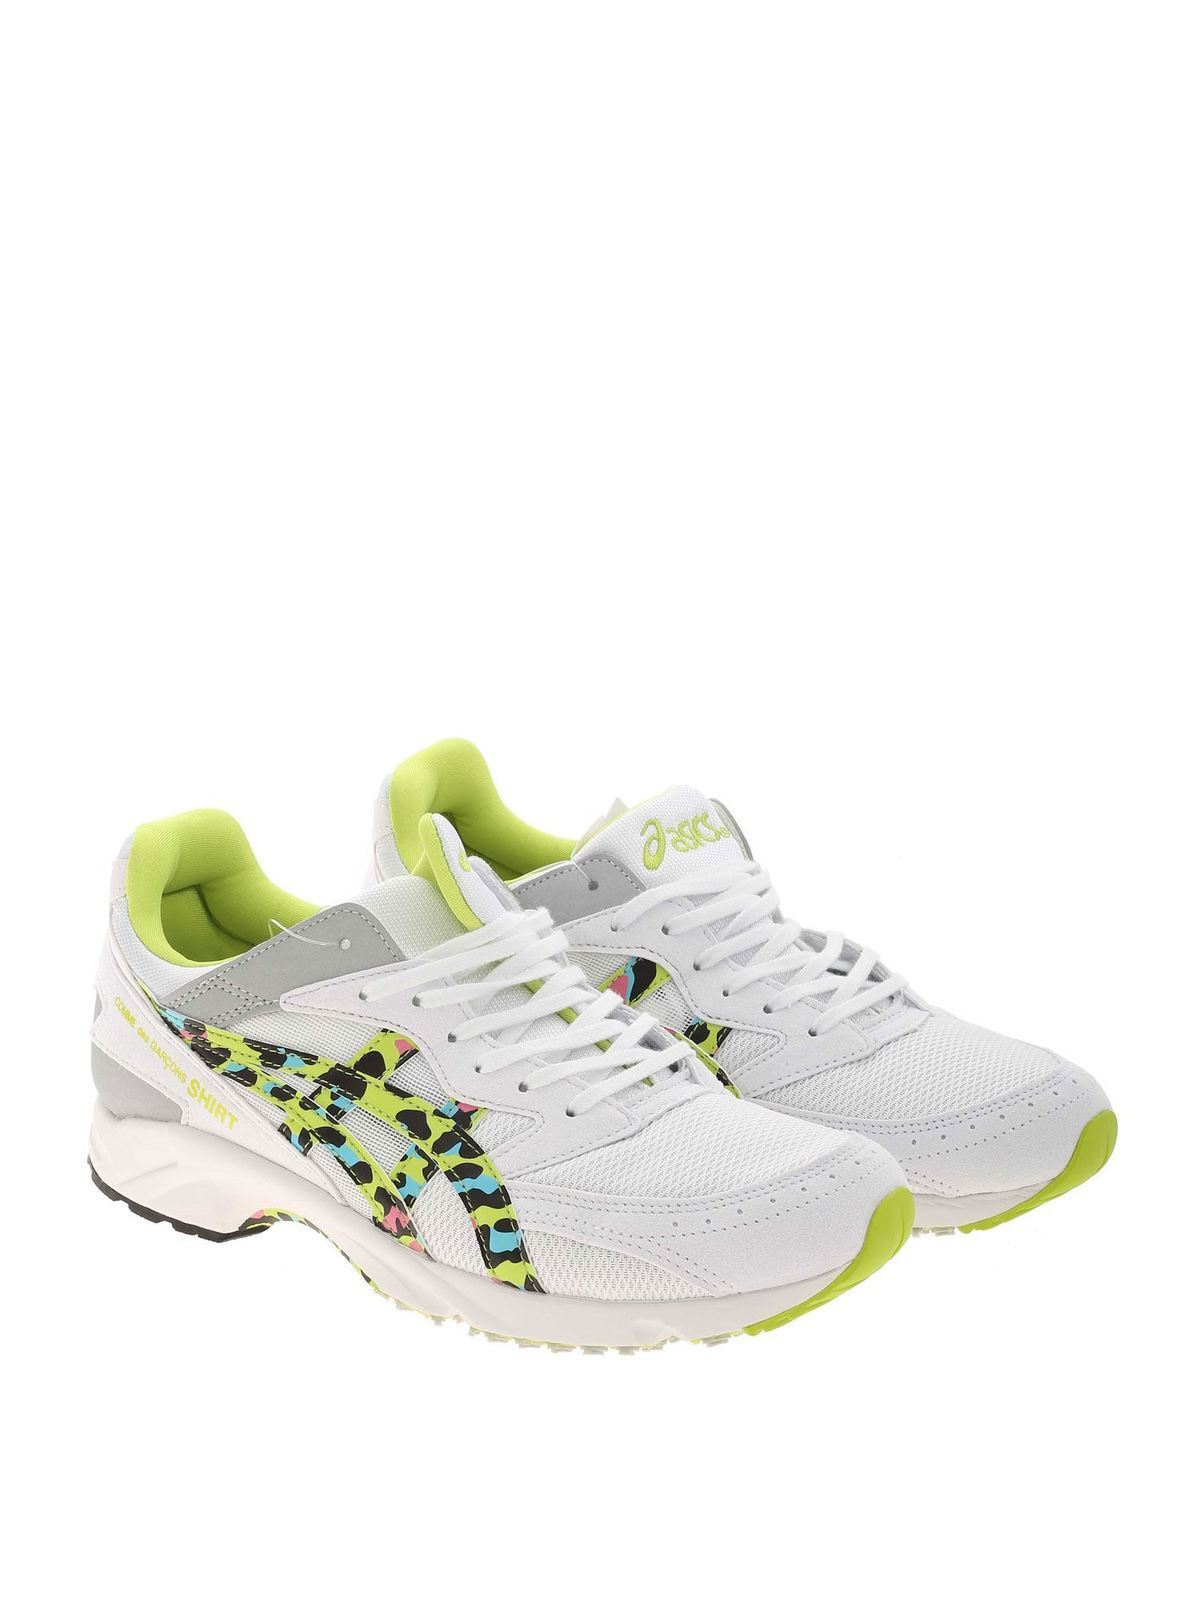 Shop Comme Des Garçons Shirt Tarther Sc Sneakers In White And Fluo Yellow In Blanco